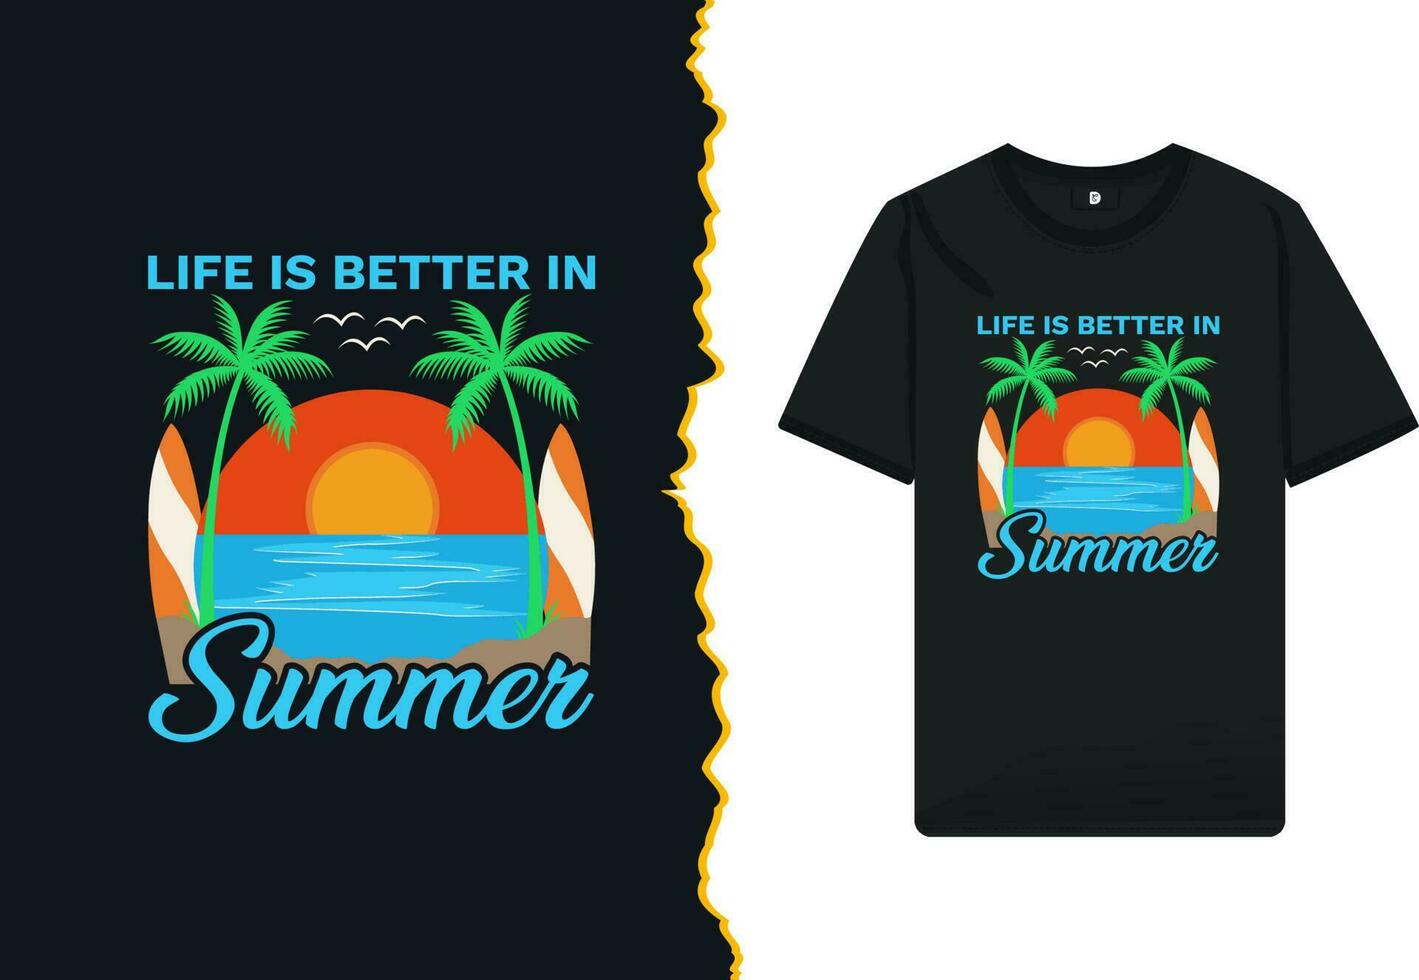 Summer sunrise t-shirt design vector template. A beautiful and eye-catching Beach illustration art good for Clothes, bags, caps, and Mug designs.